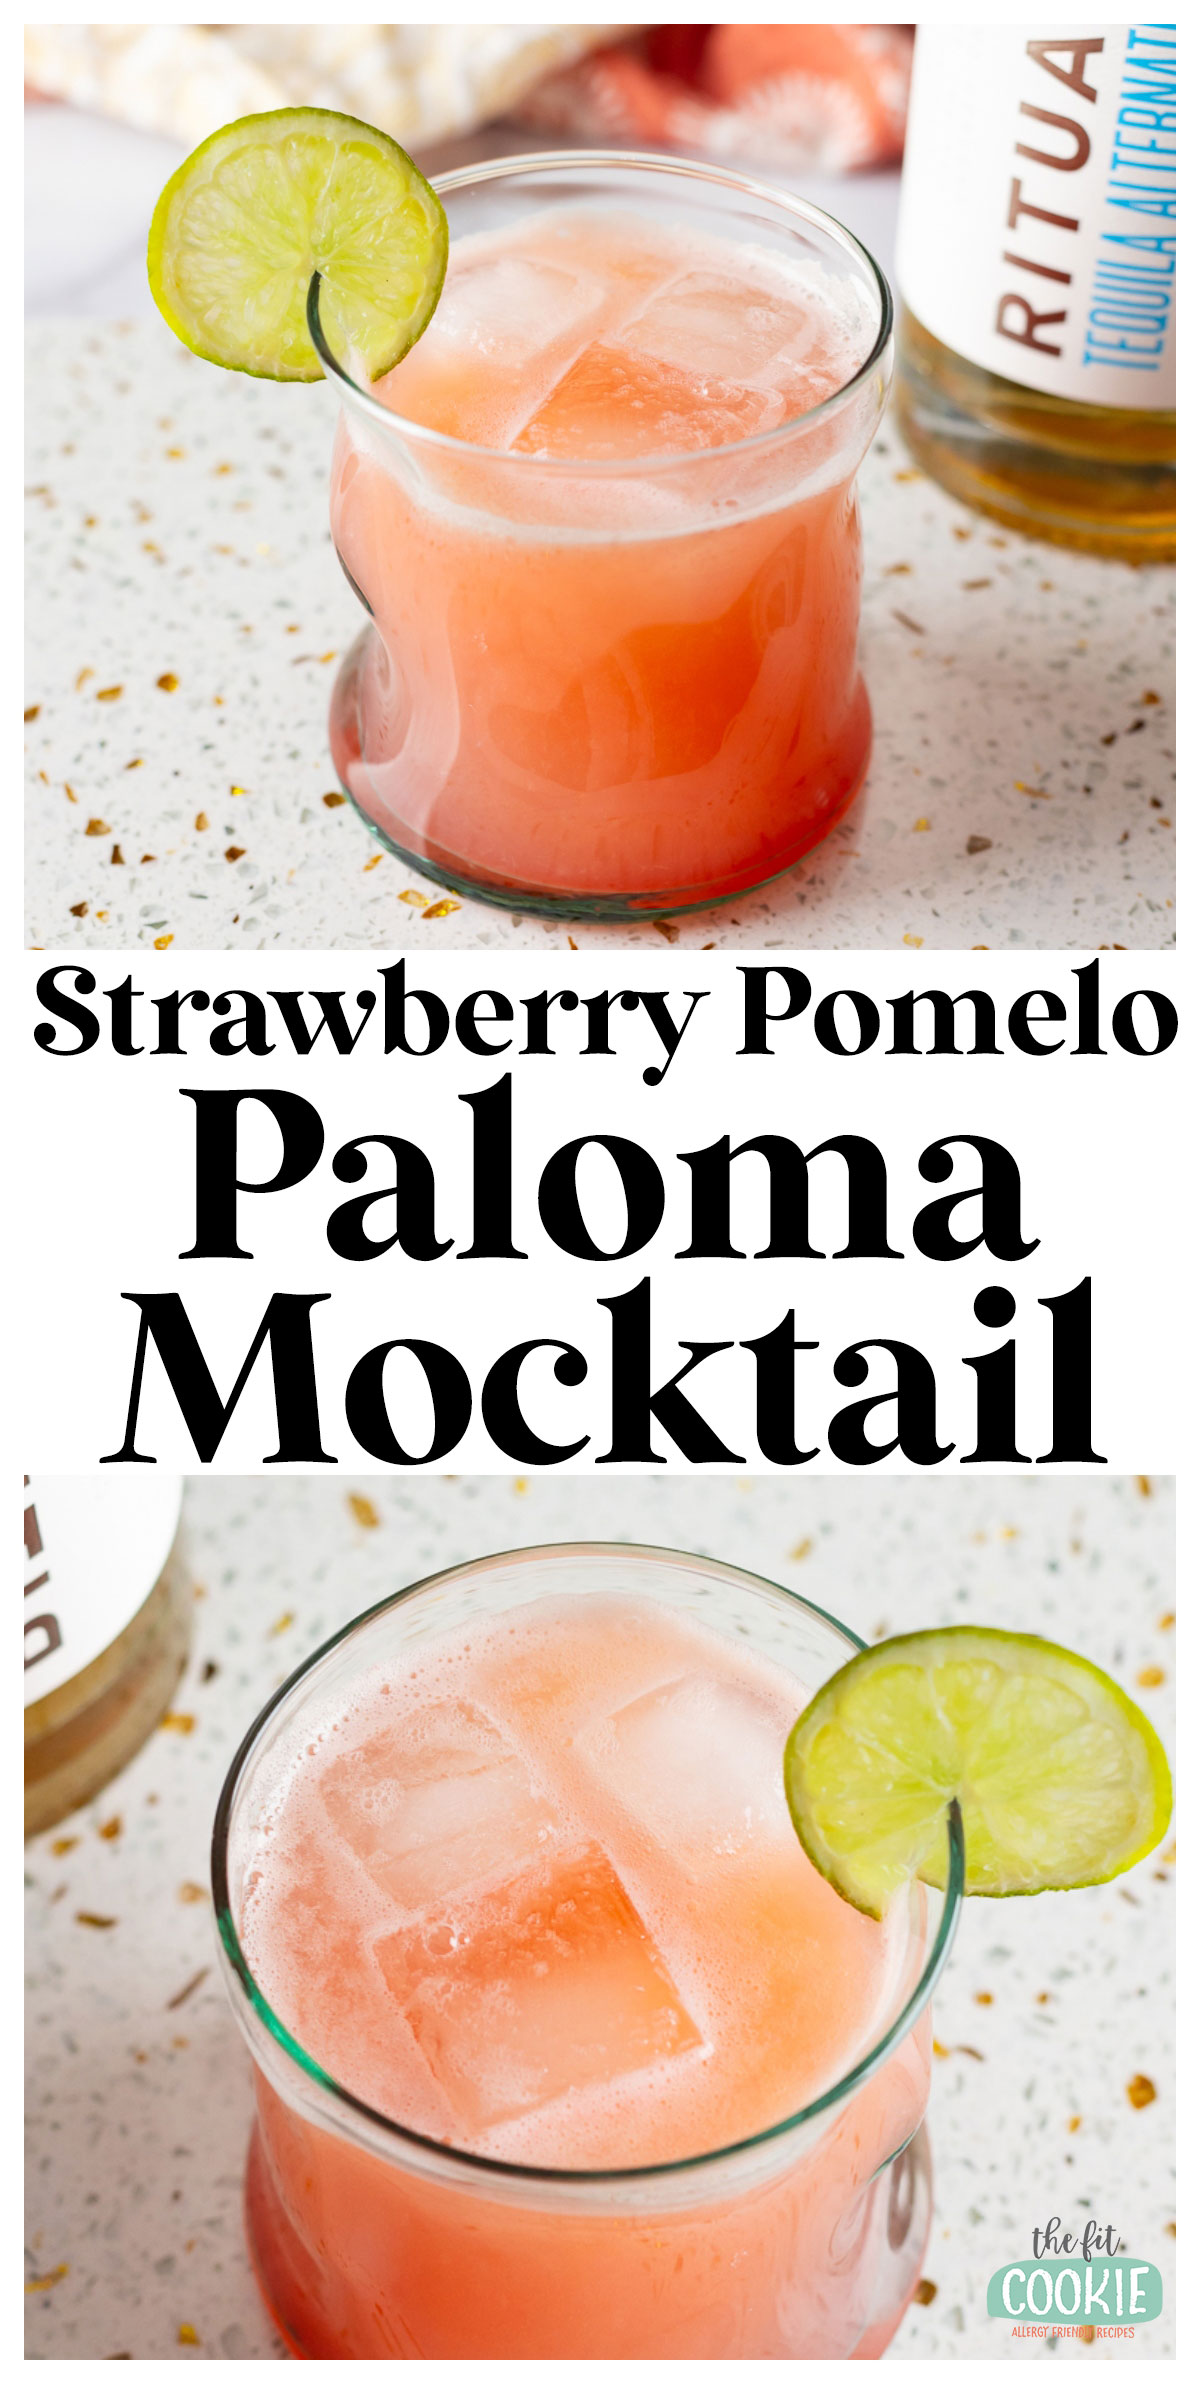 photo collage with text overlay that says "Strawberry pomelo paloma mocktail".